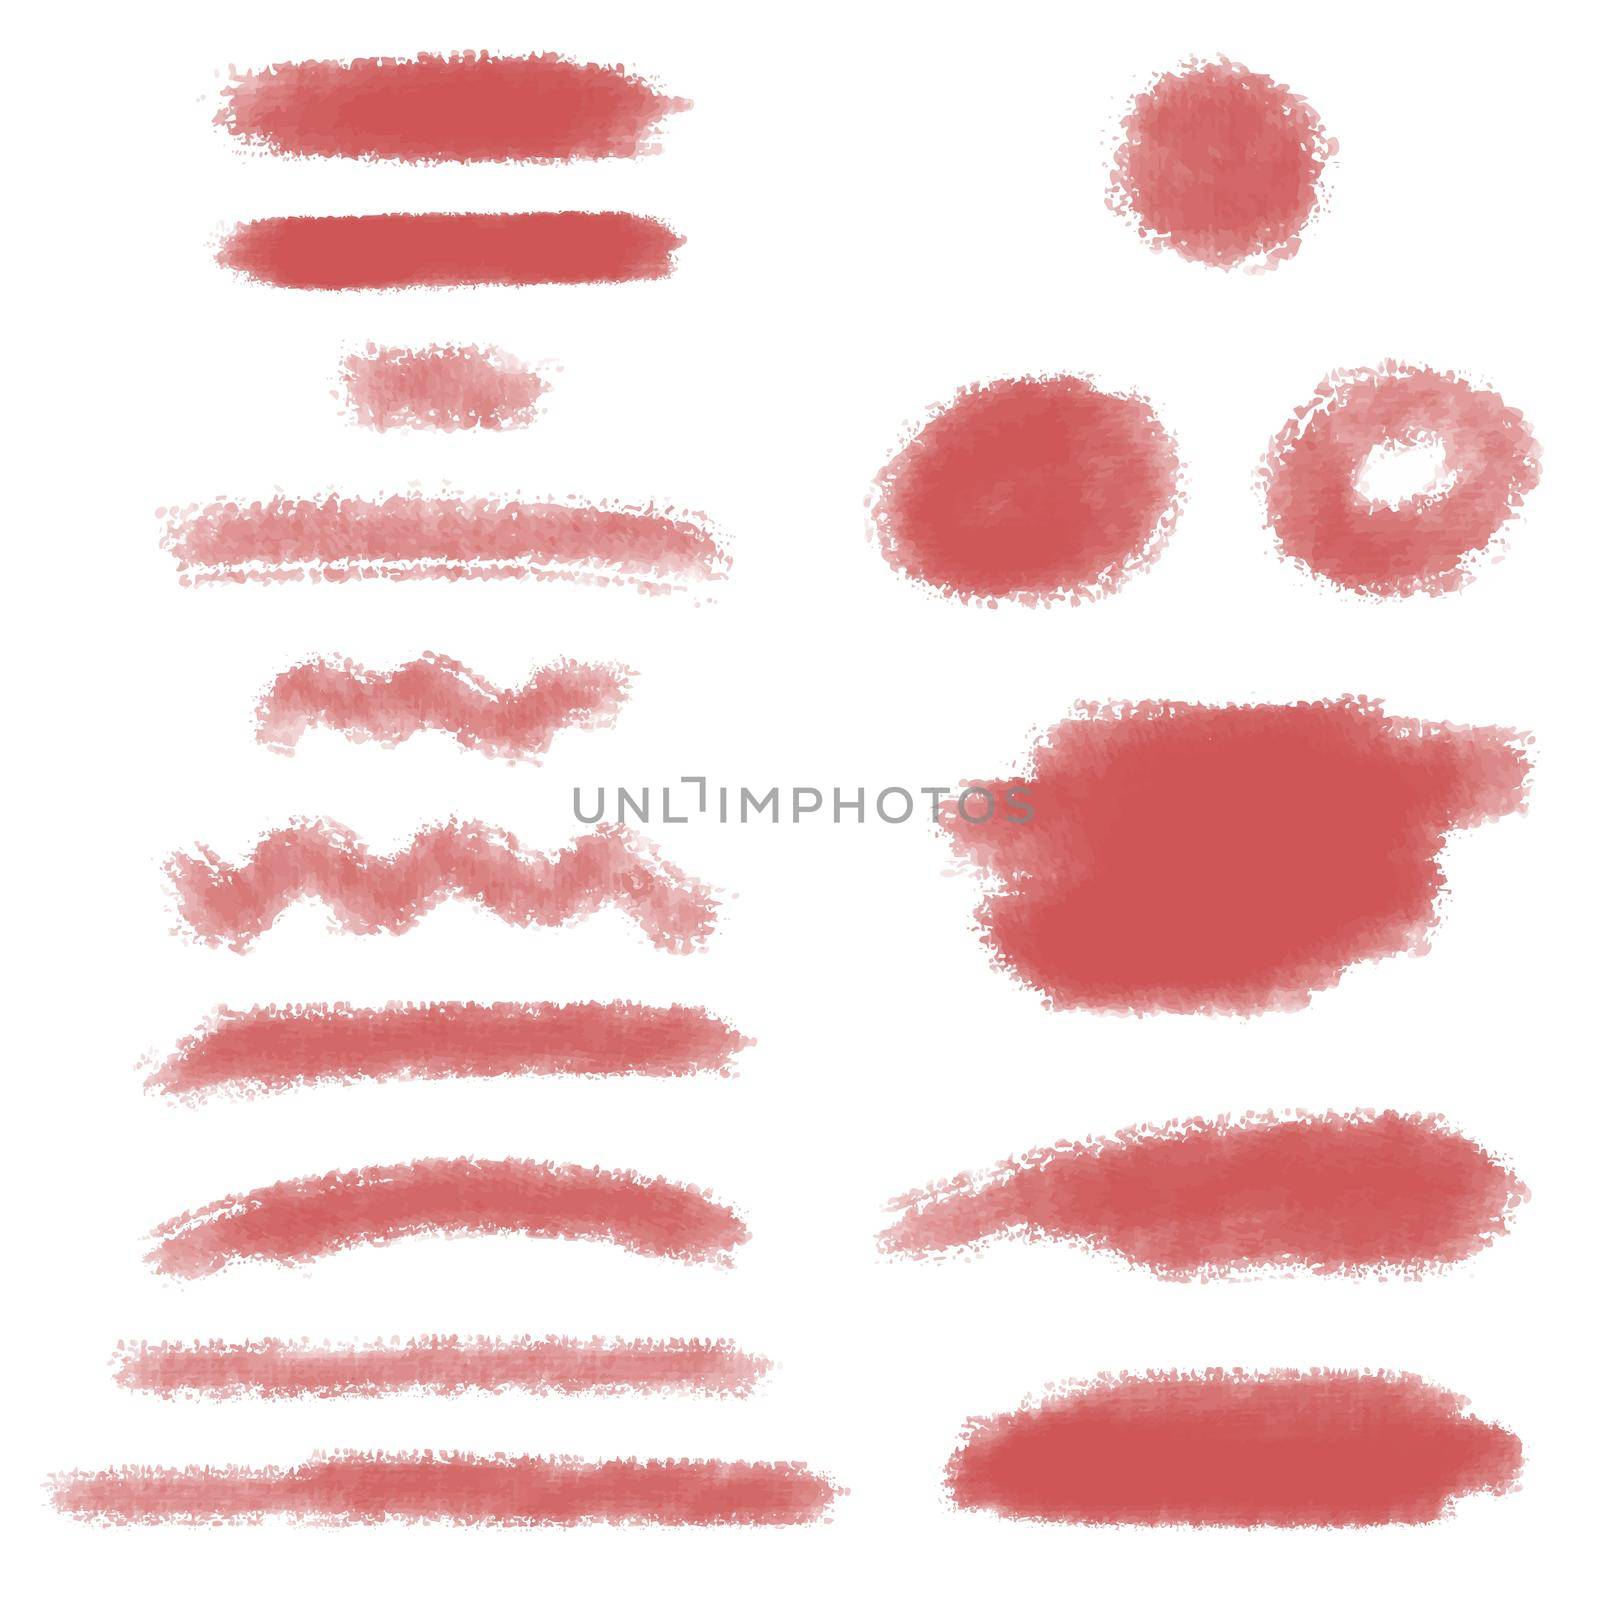 Pink hand drawn brush strokes, marker text highlighters by clusterx